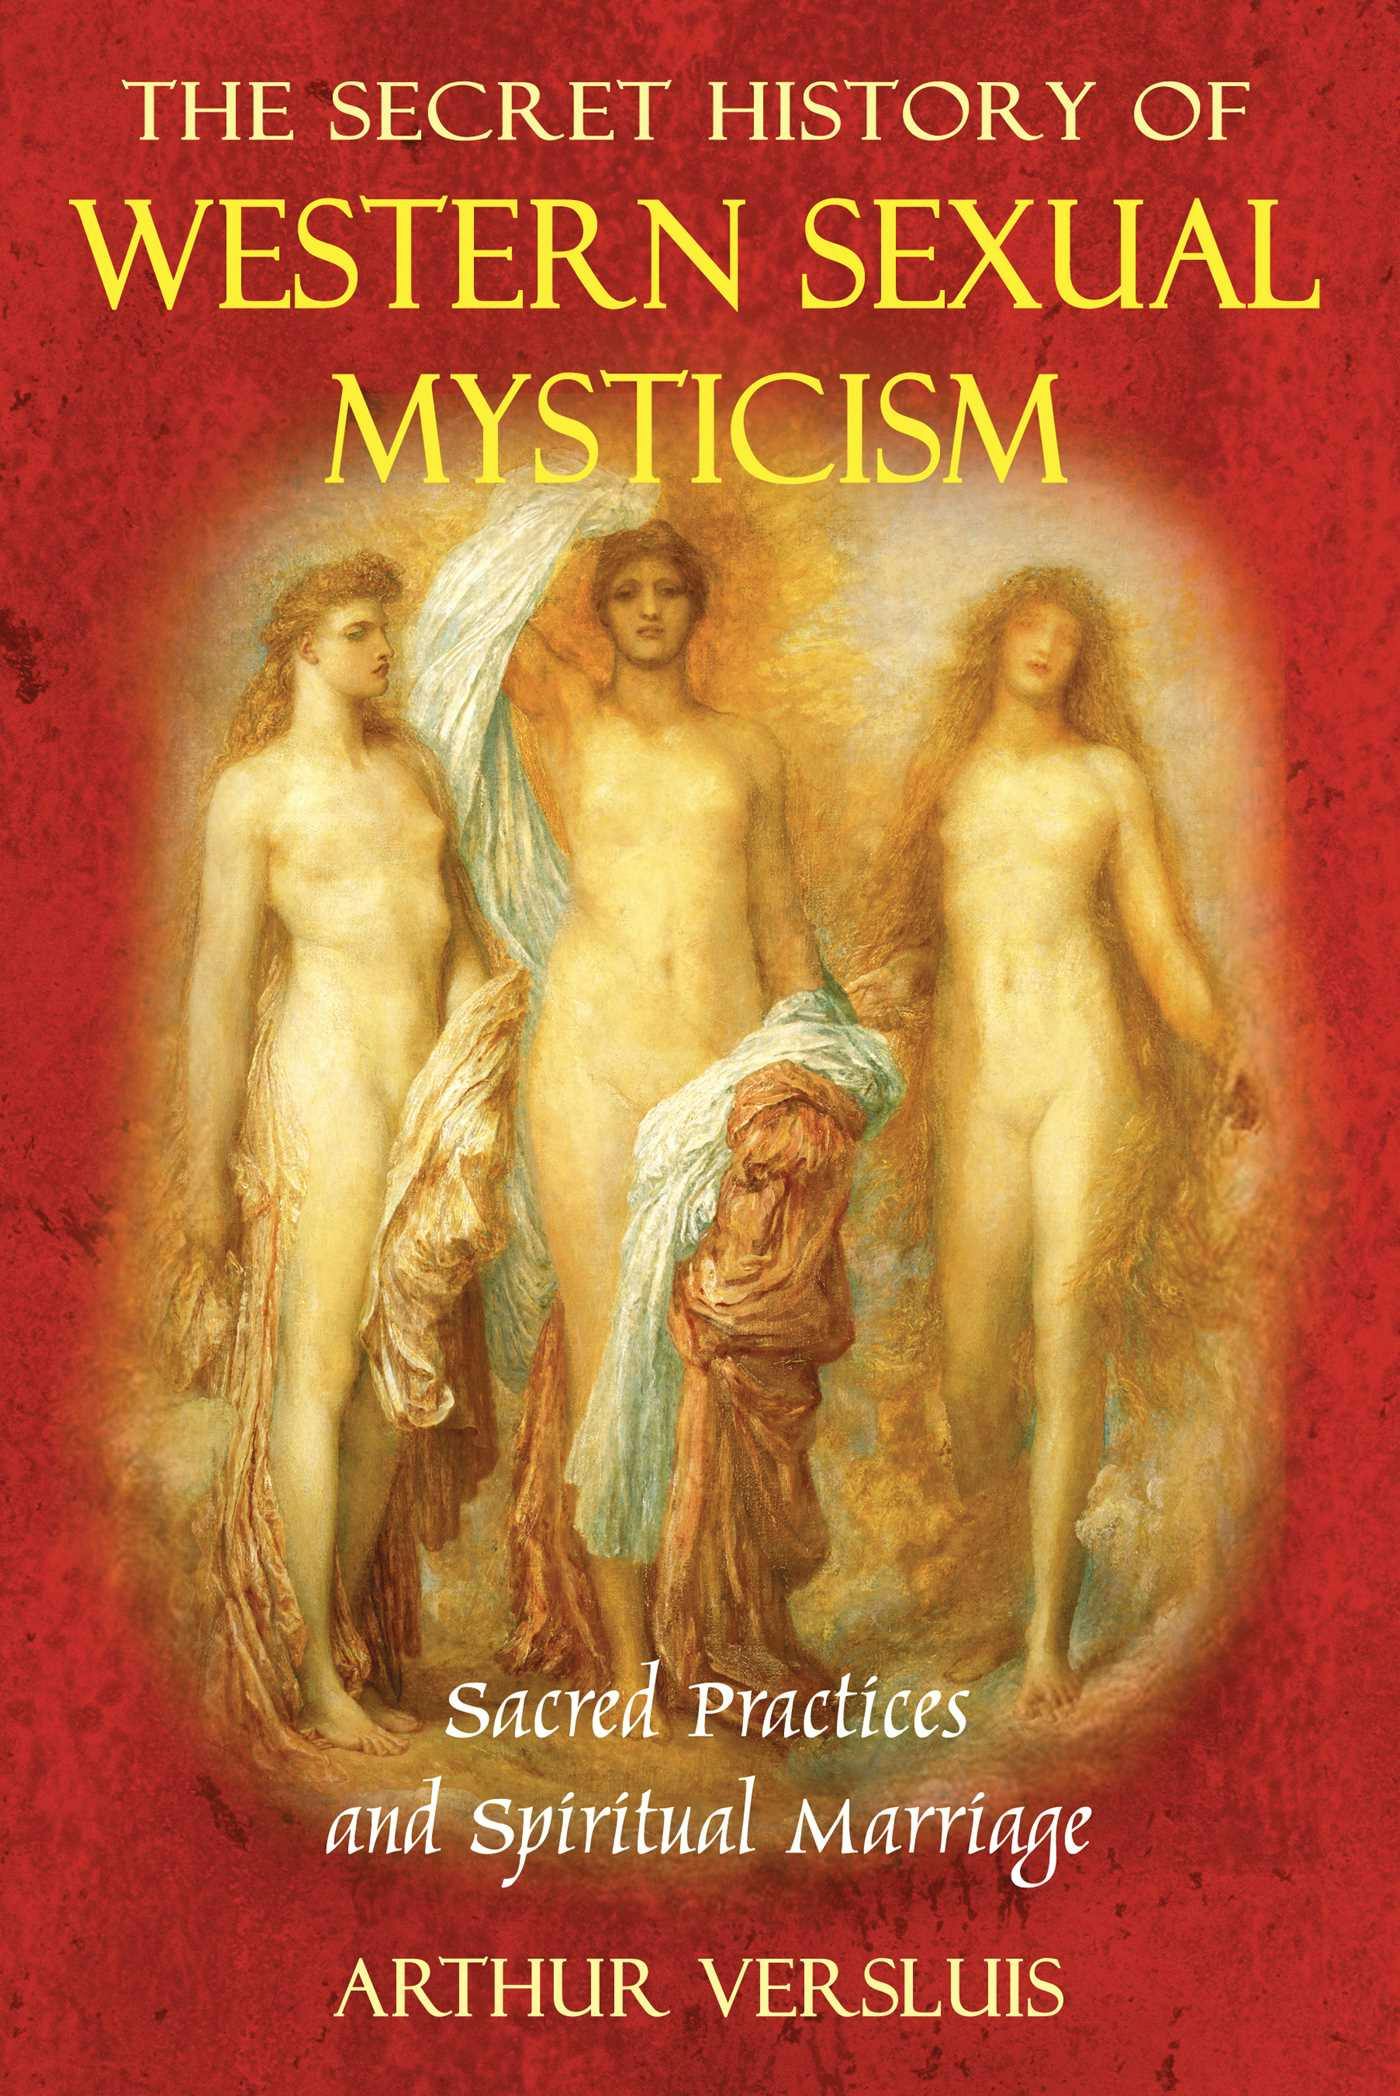 The Secret History of Western Sexual Mysticism: Sacred Practices and Spiritual Marriage - Arthur Versluis